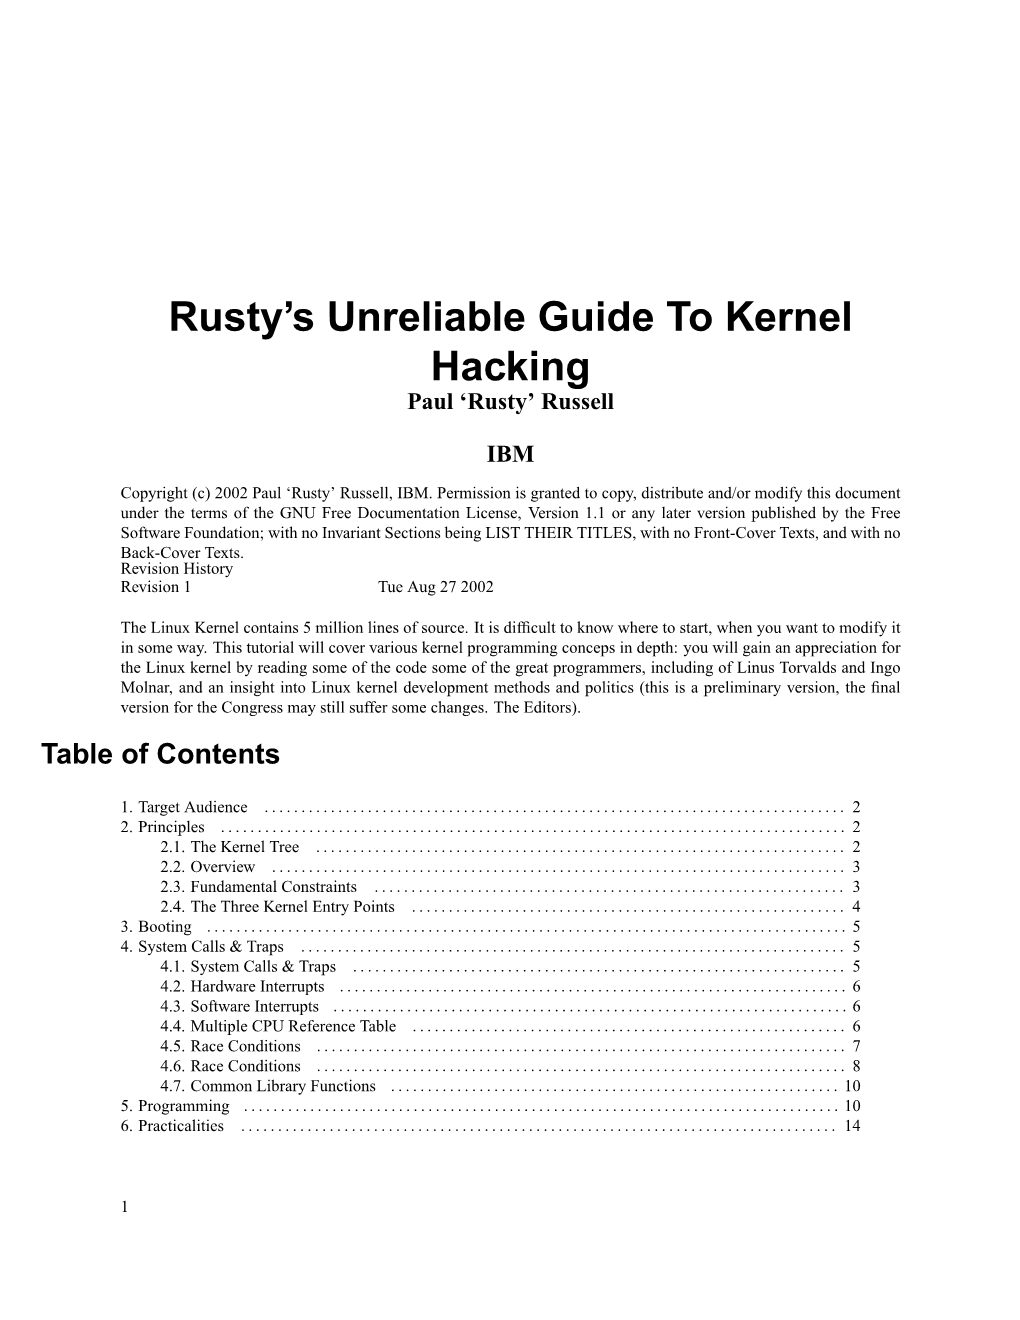 Rusty's Unreliable Guide to Kernel Hacking